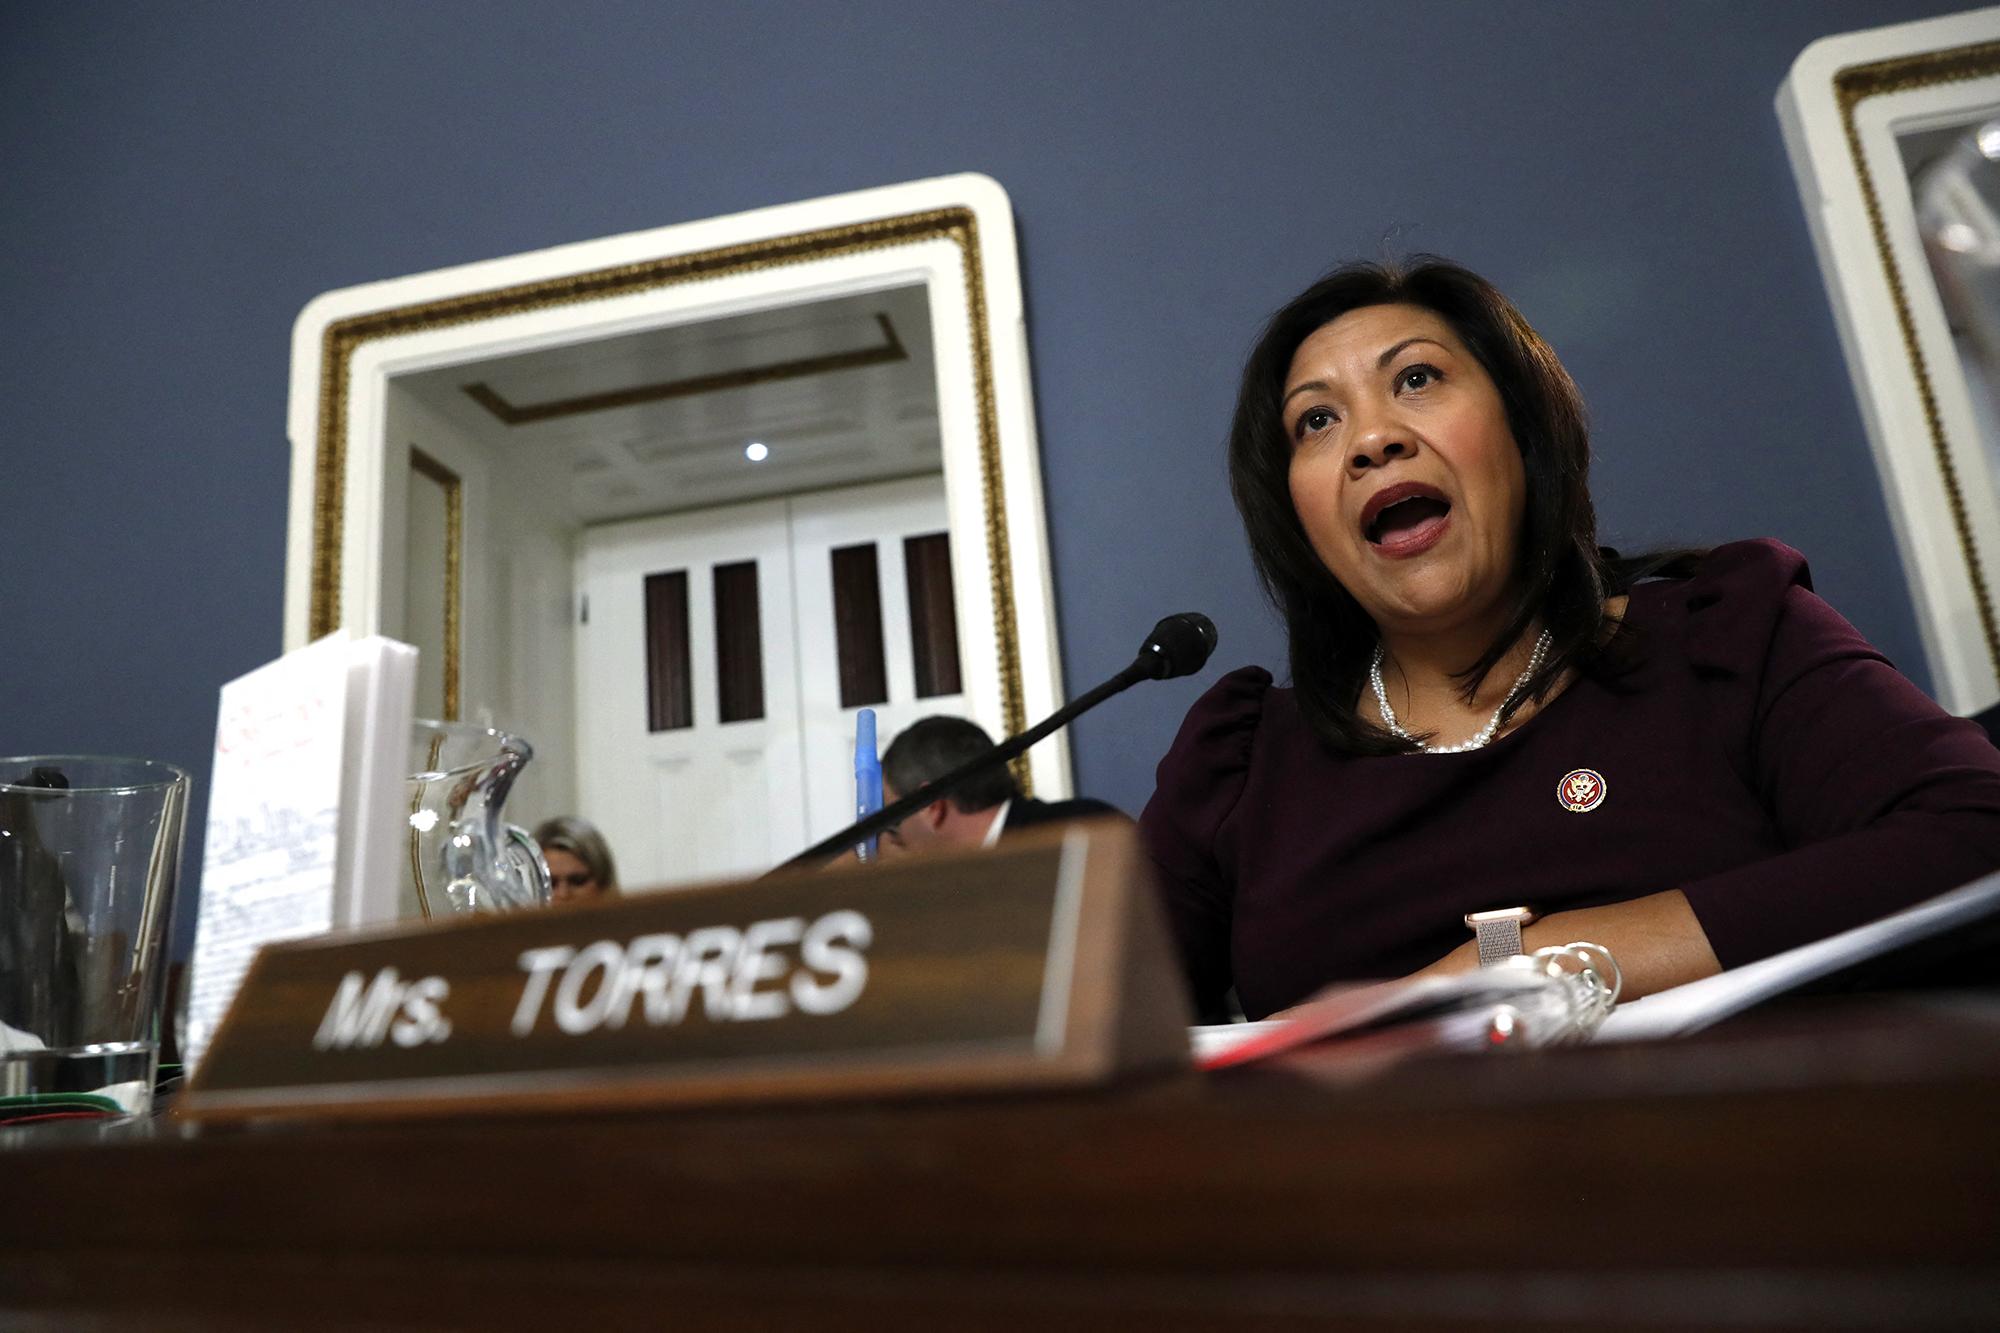 Representative Norma Torres (D-CA) during a House Rules hearing on the impeachment of Donald Trump on December 17, 2019 in Washington, D.C. Photo: Jacquelyn Martin/AFP